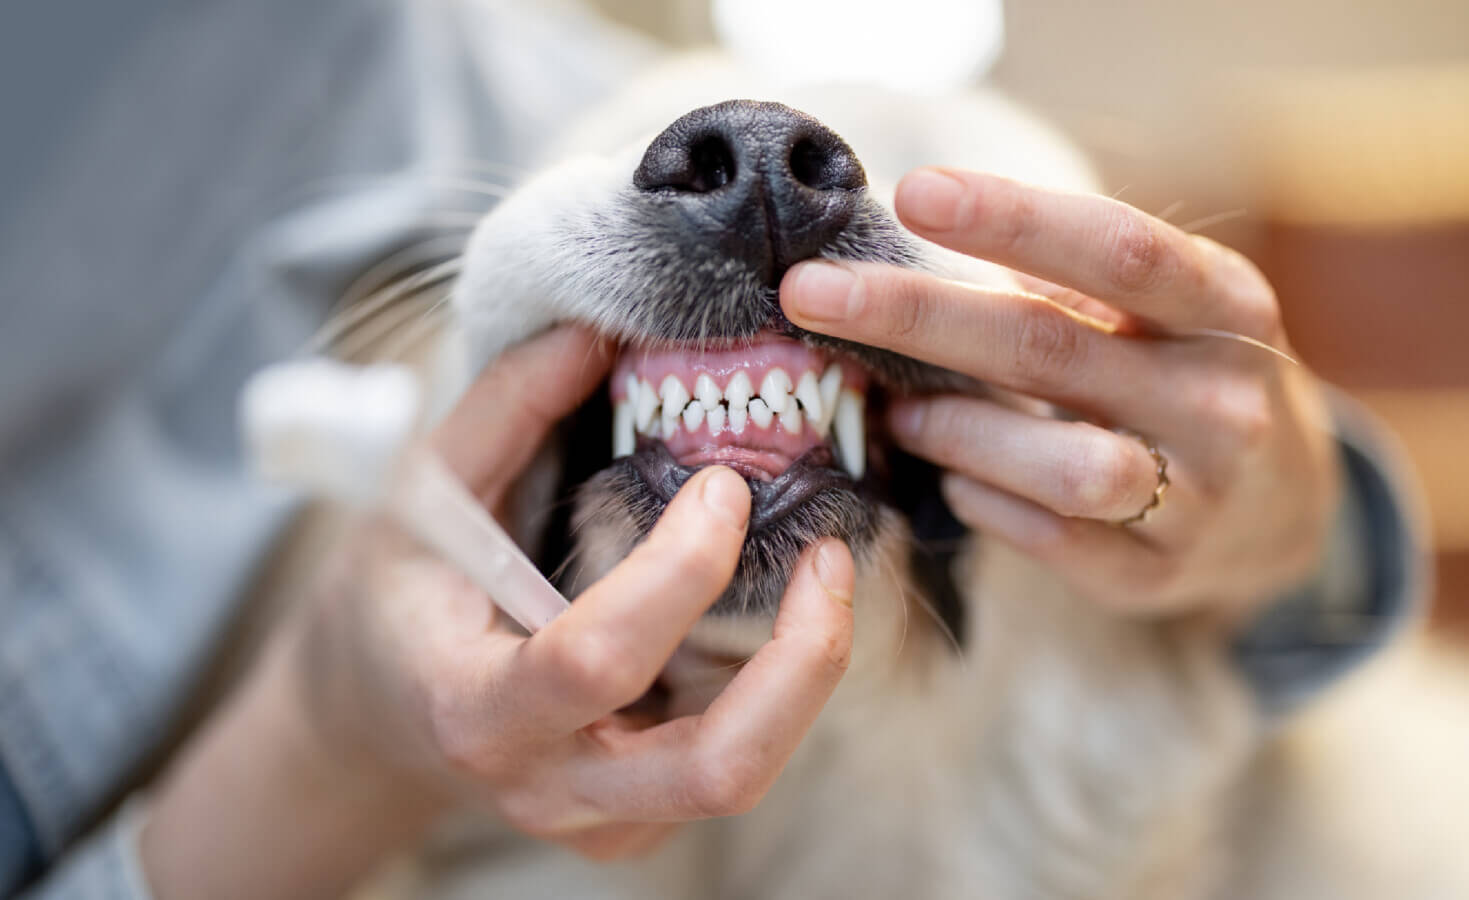 Person holding toothbrush shows dogs teeth